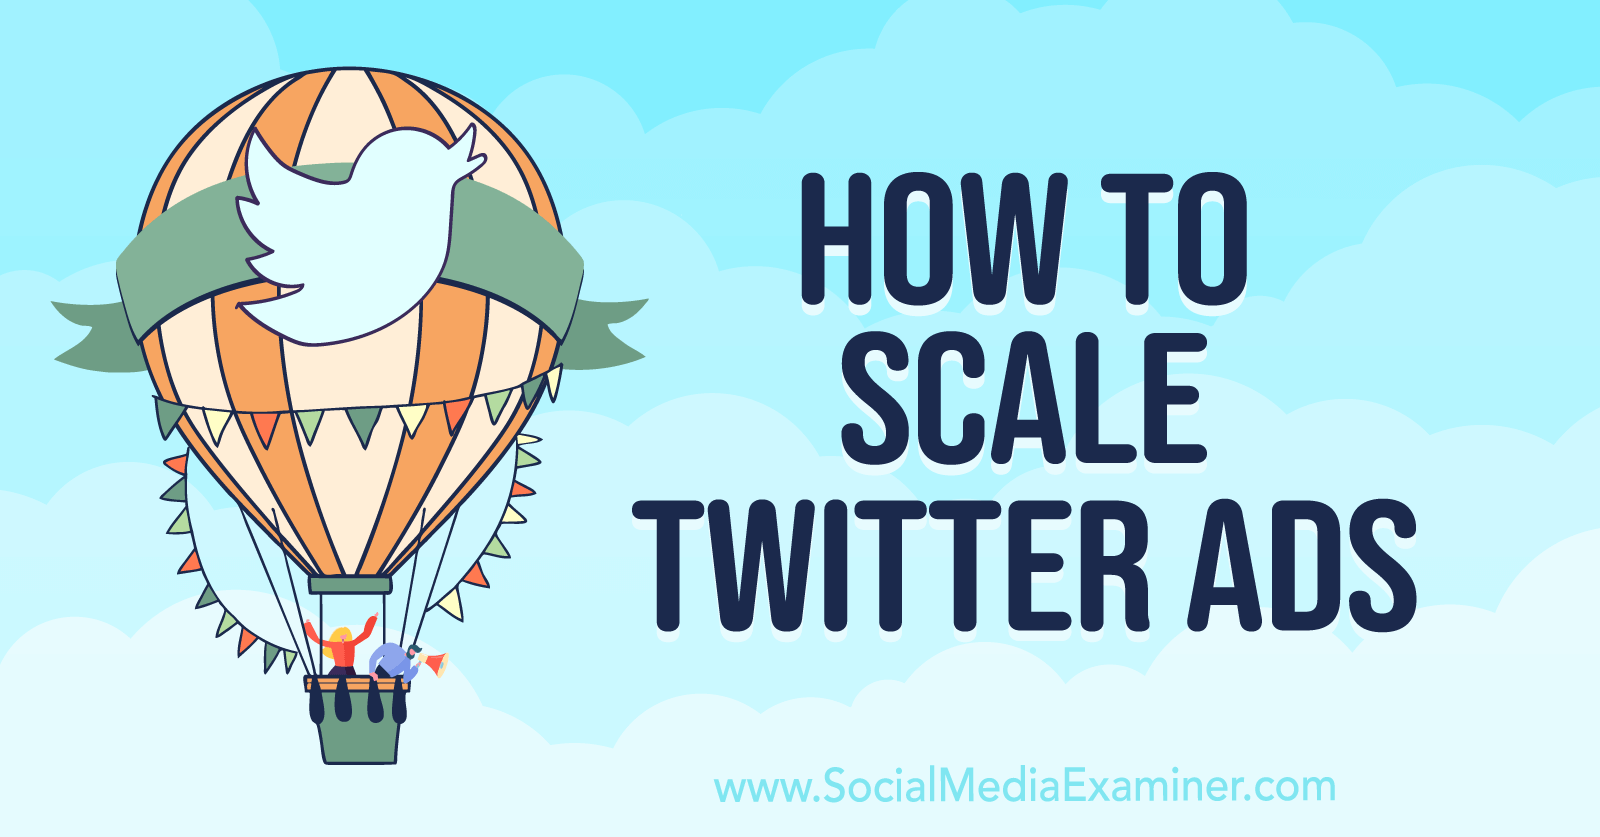 How to Scale Twitter Ads-Social Media Examiner